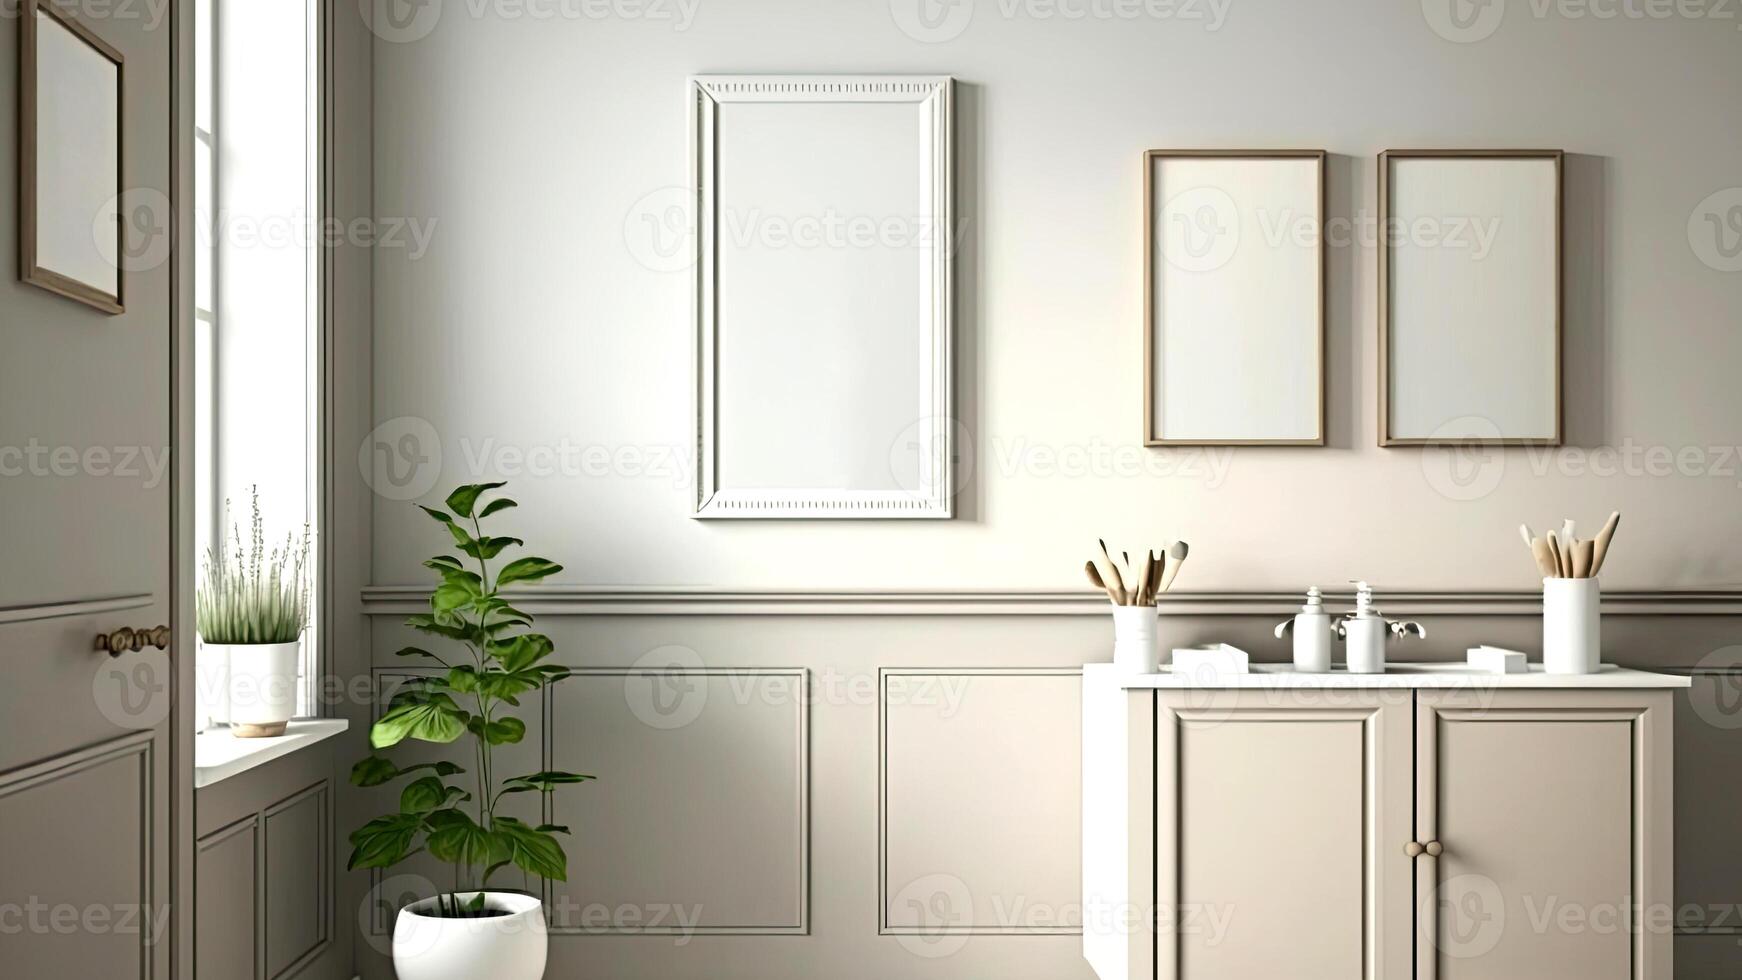 Renovated bathroom with a vanity cabinet, indoor plants, and and blank photo frames against white walls. Natural light coming through windows. .